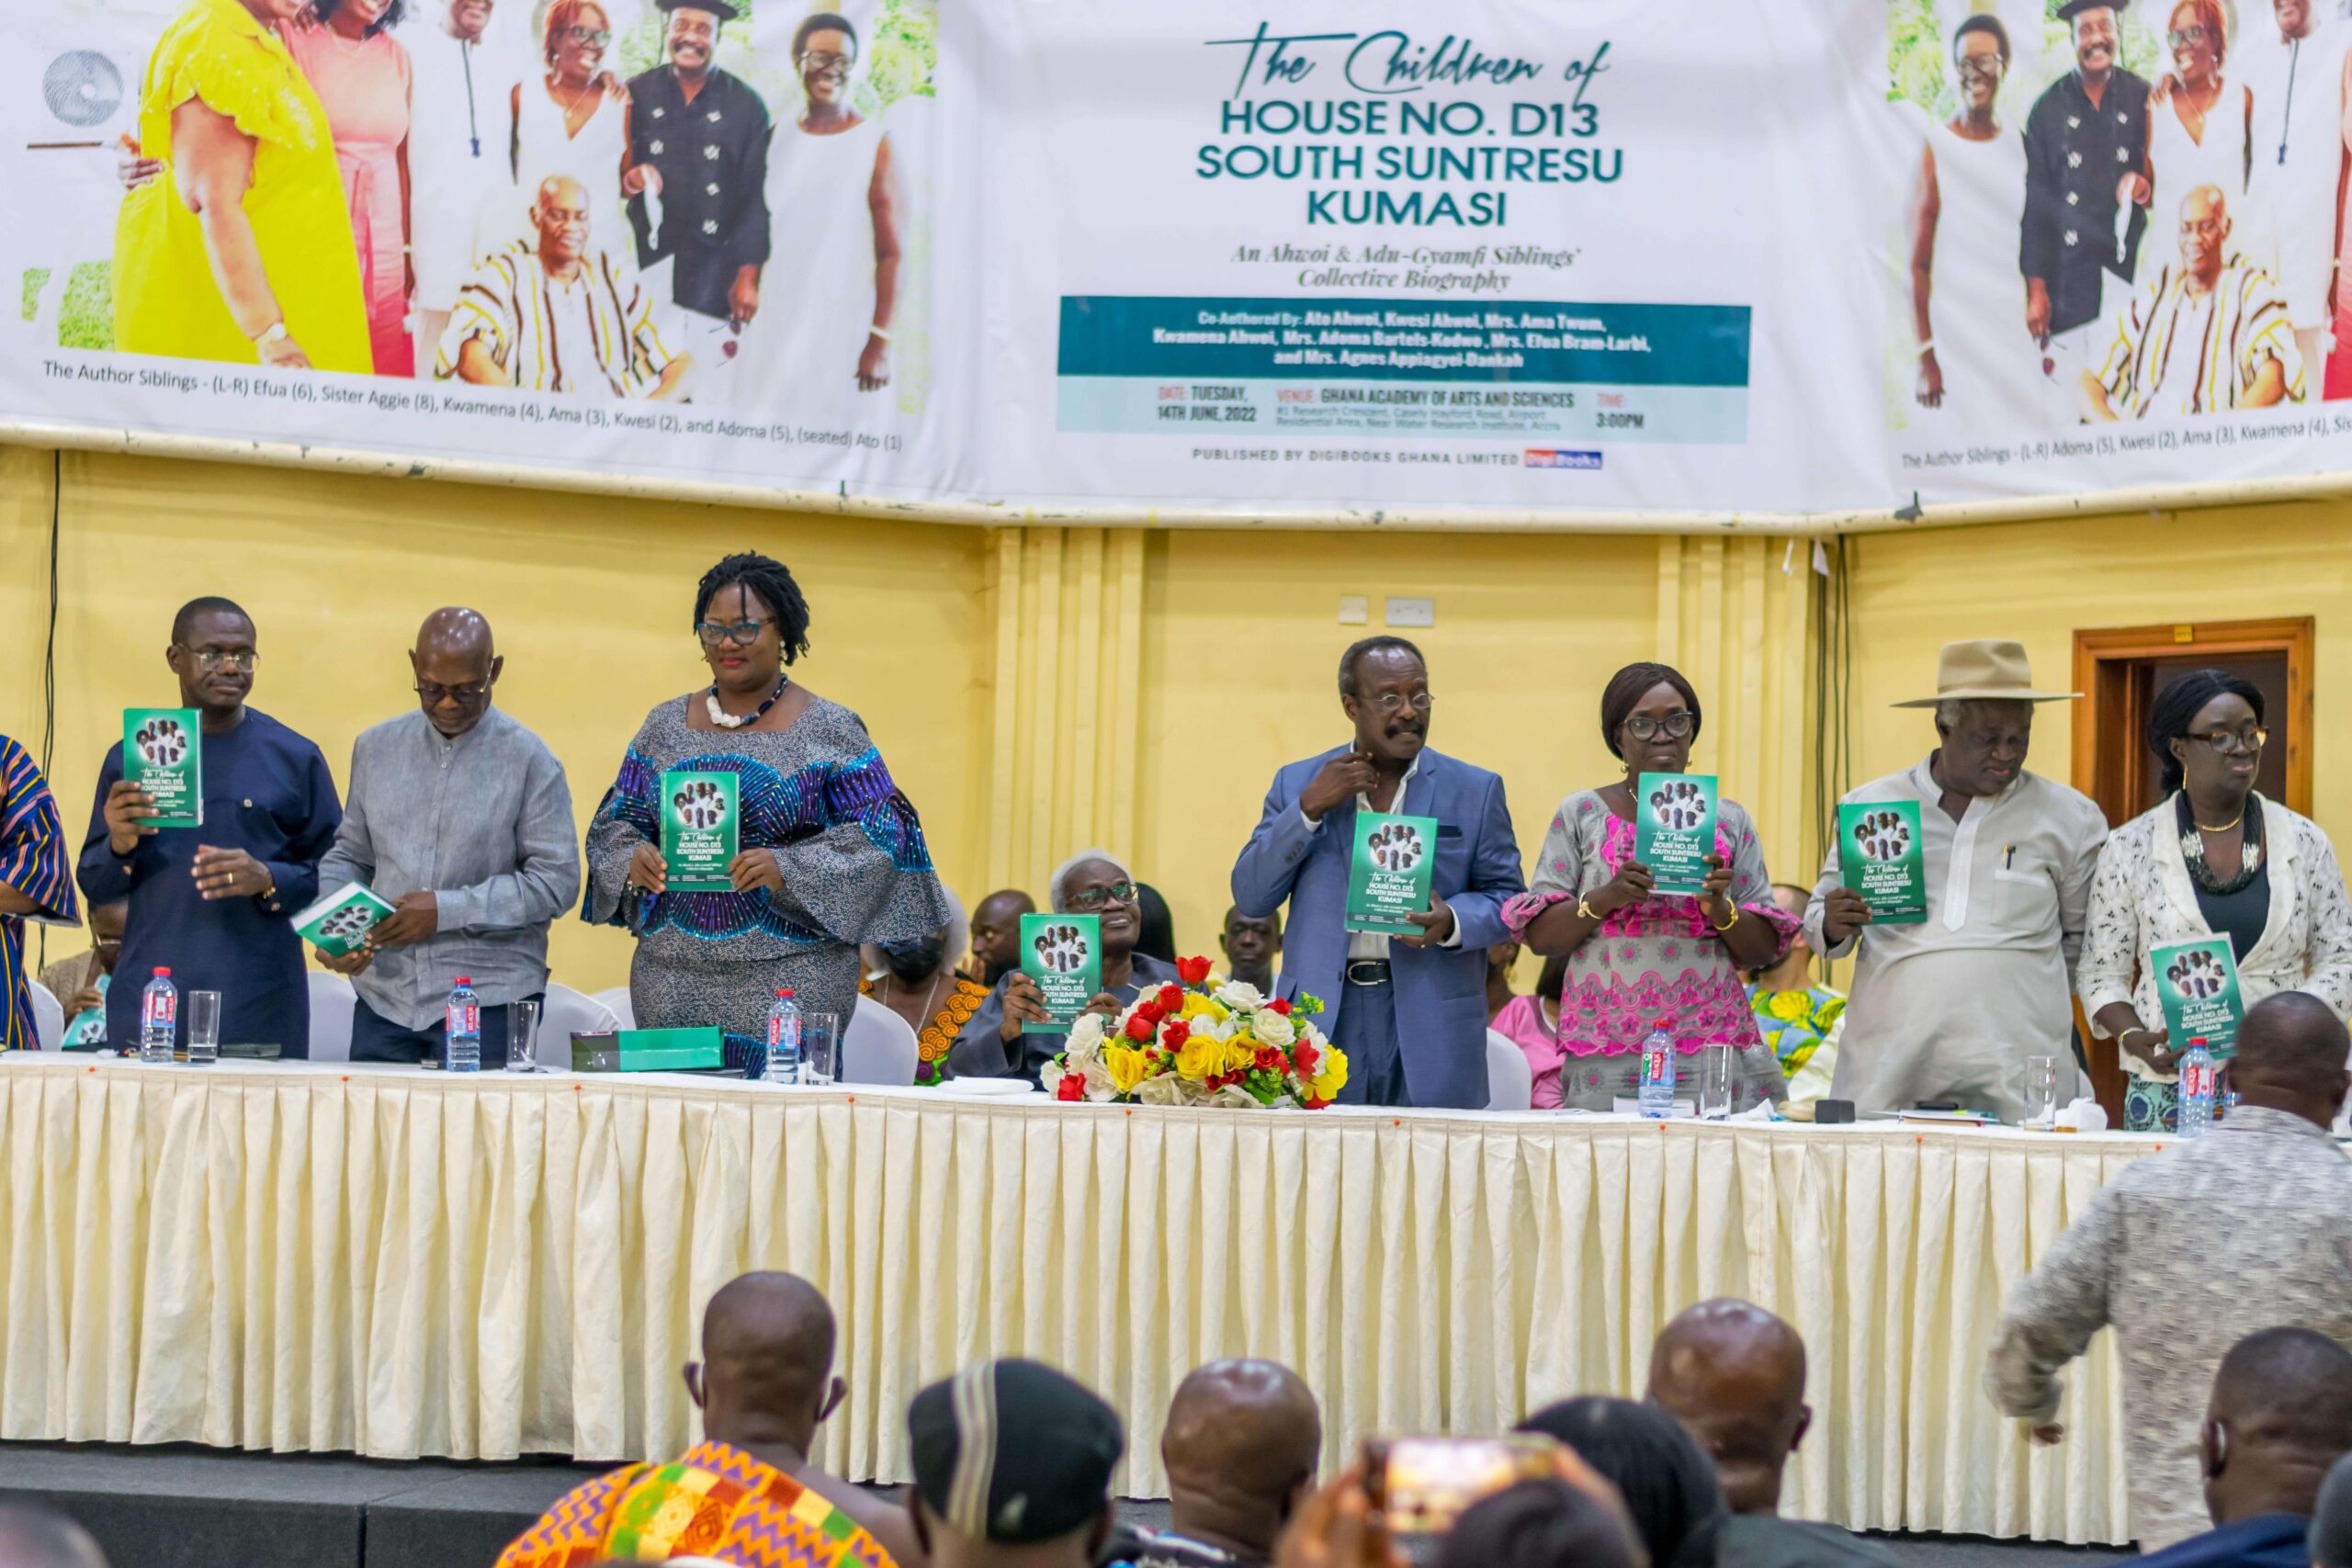 Ahwoi and Adu-Gyamfi siblings unveil collective biography titled ‘The Children of House No. D13 South Suntresu Kumasi’